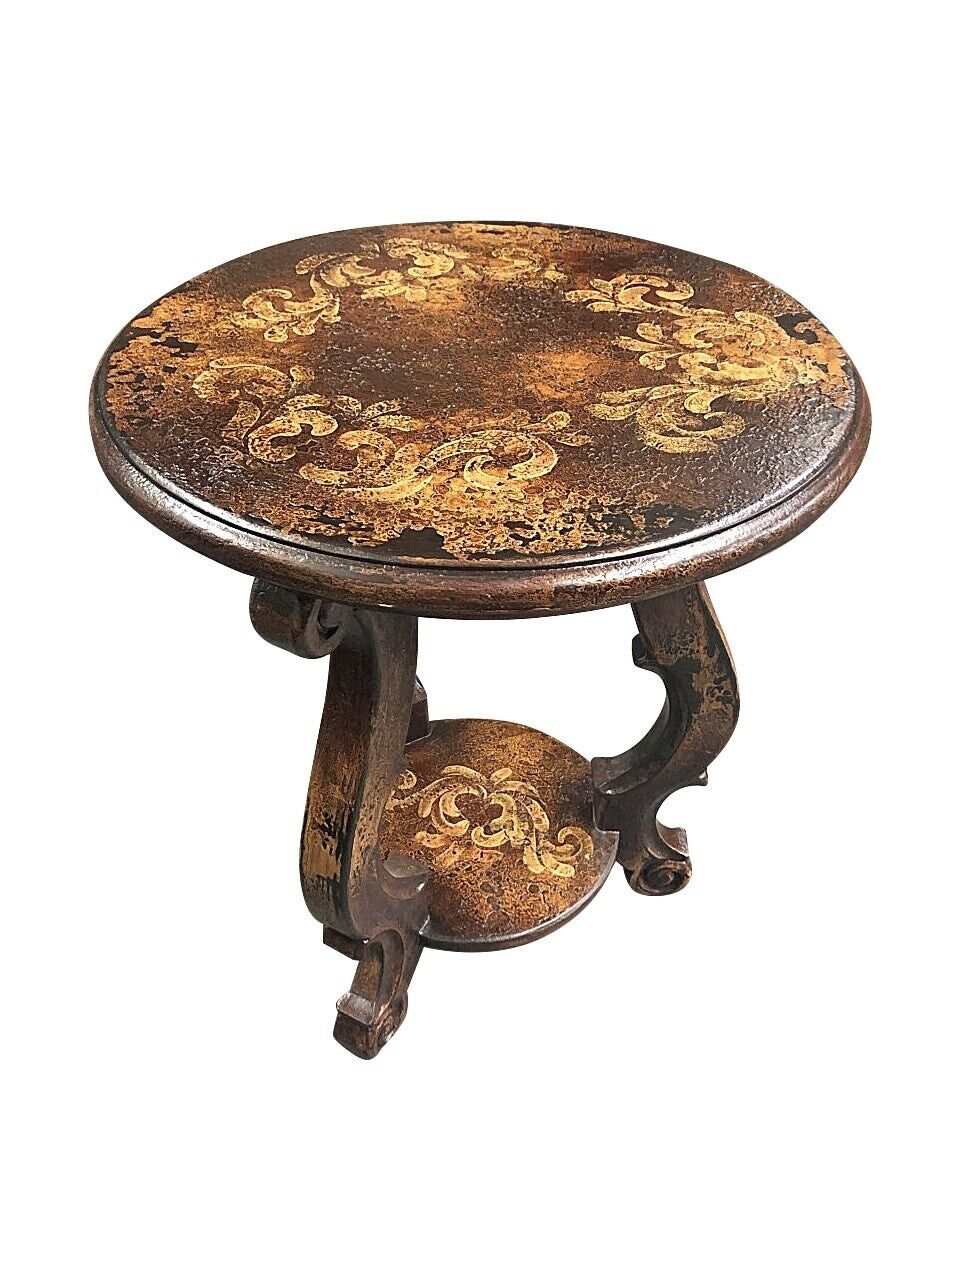 Esofastore Marbella Traditional End Table, French Style Accent Table w/ Shelf, Antique Round Side Table, Floral Hand Carvings, Nat. Terra